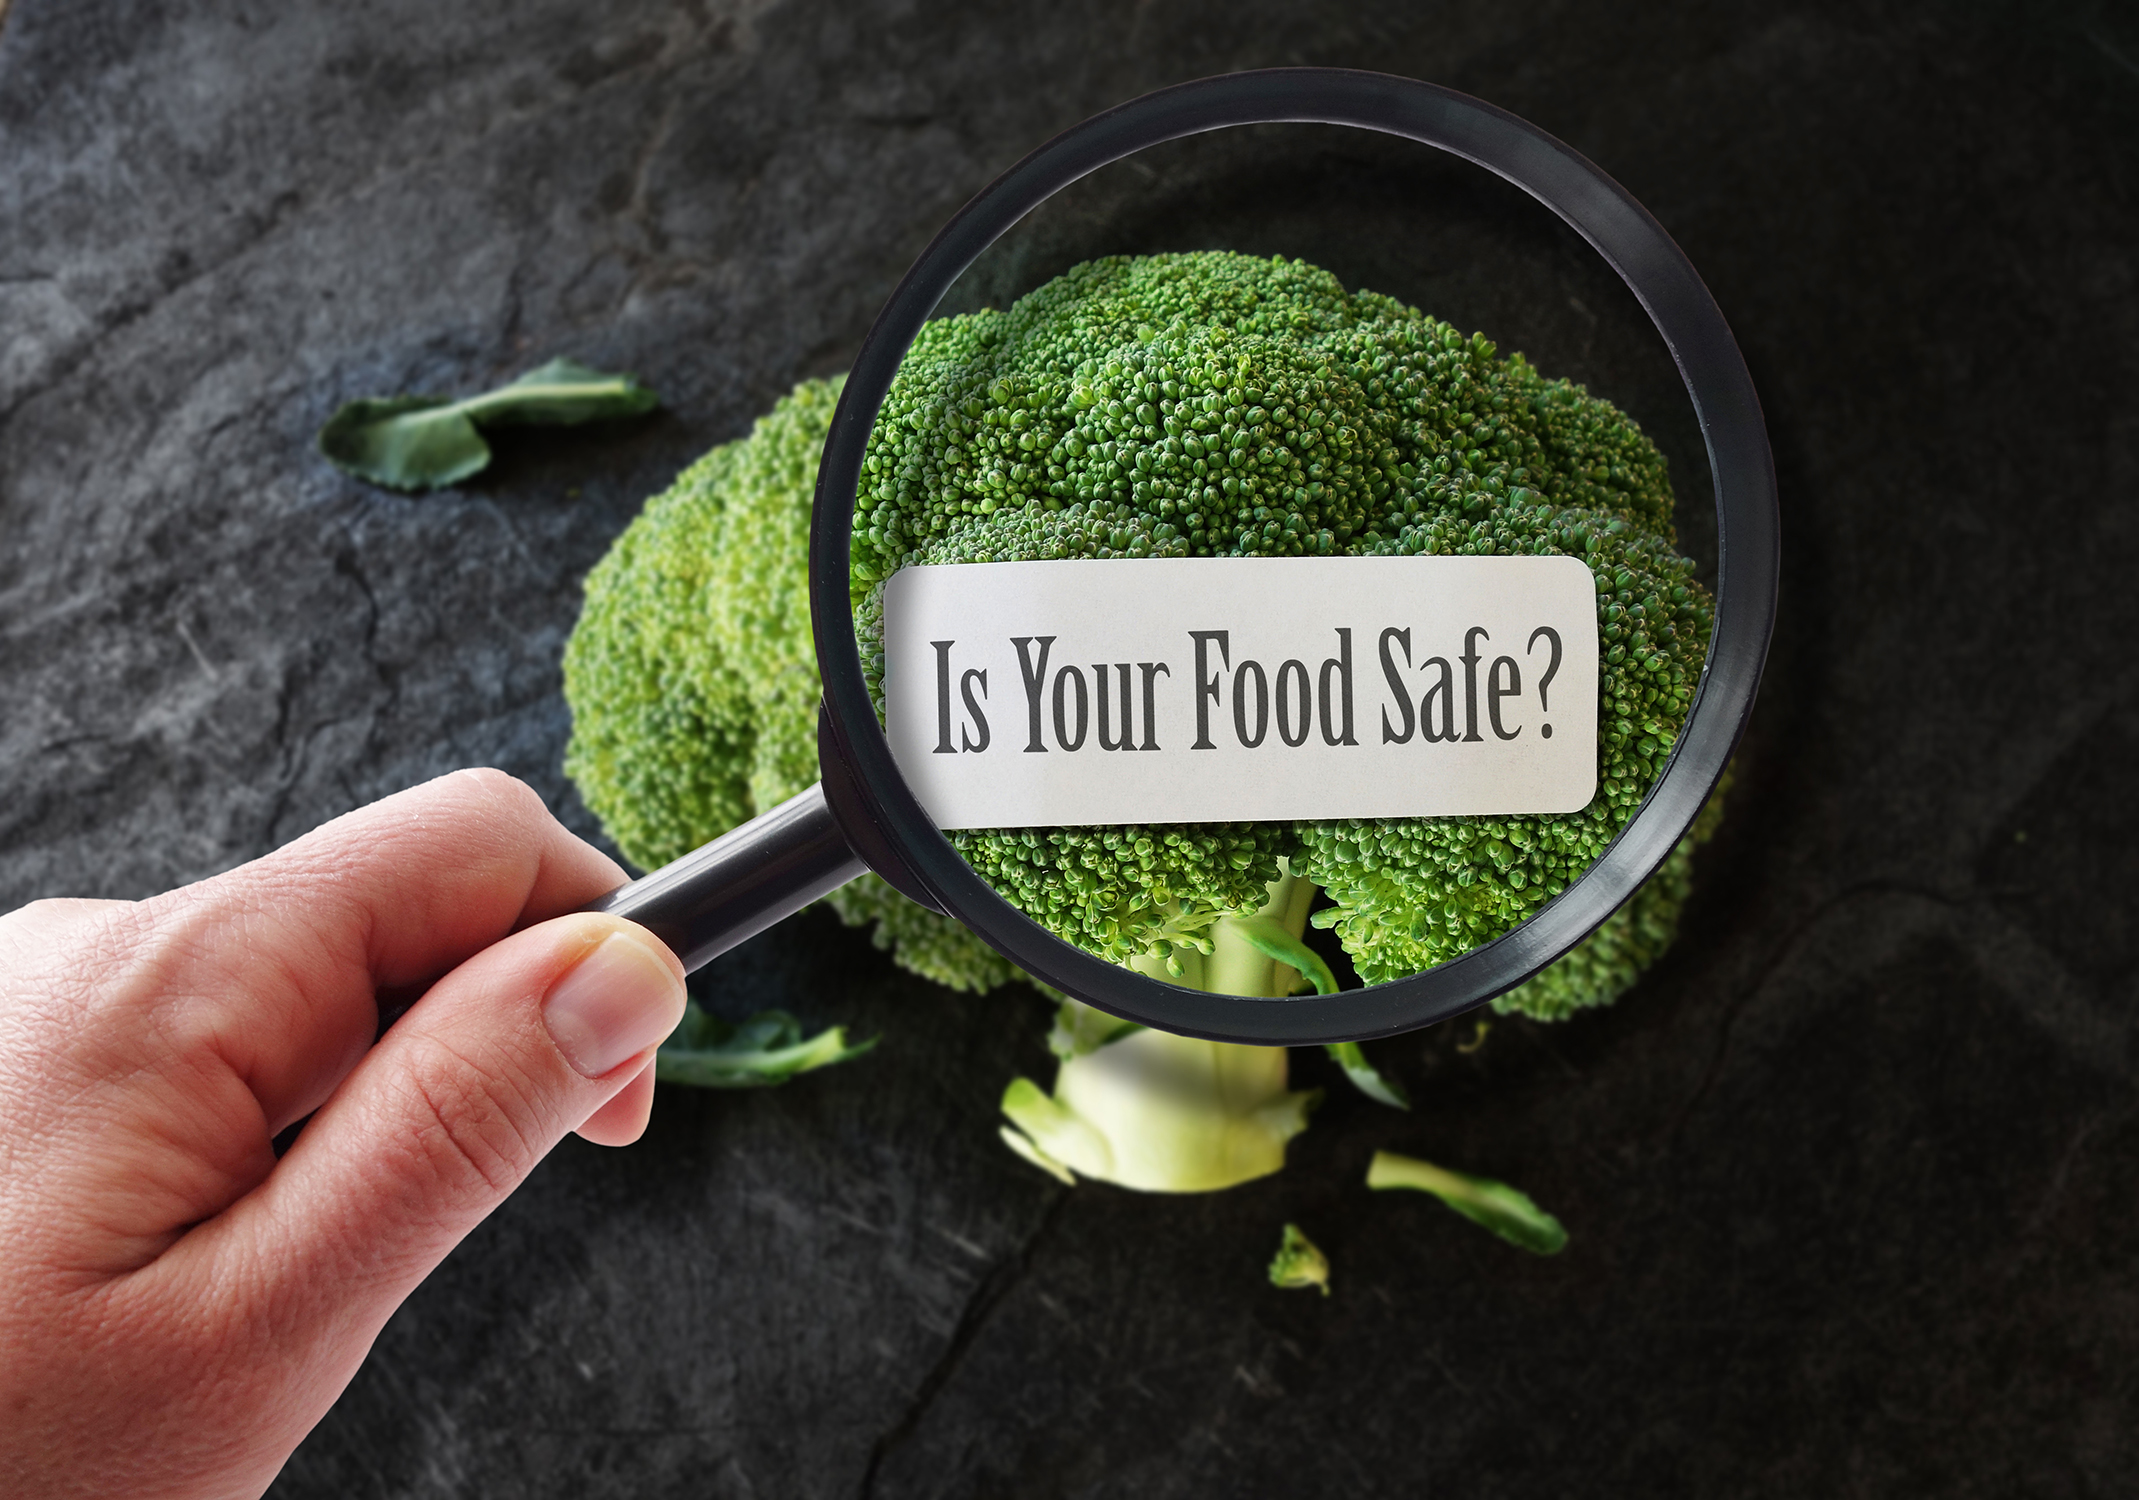 Broccoli under magnifying glass with a sign saying “Is your food safe to eat?”